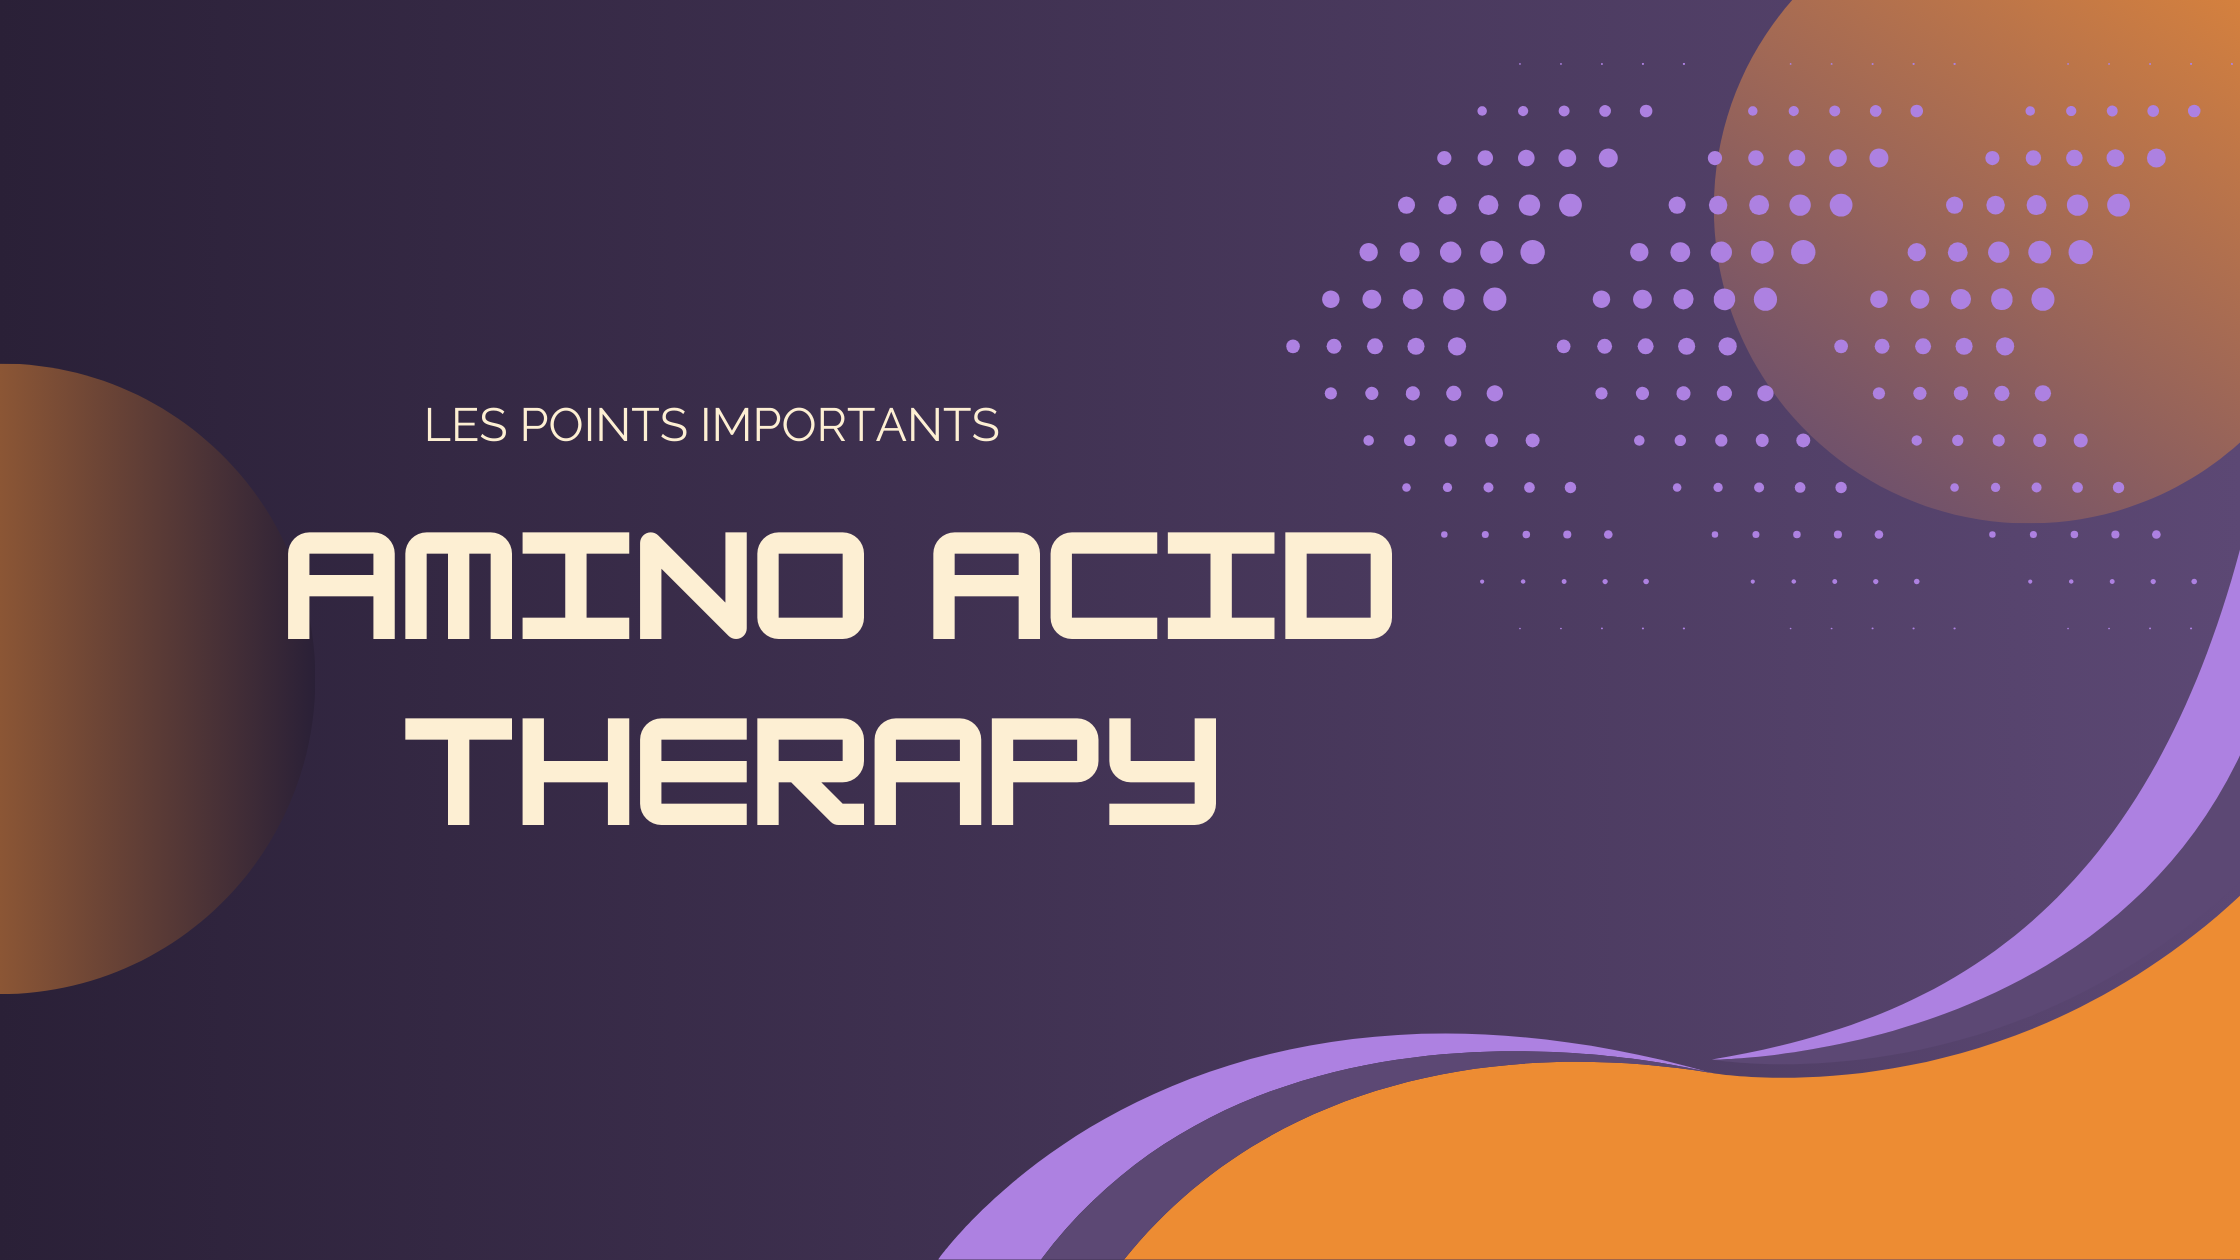 amino acid therapy | Les points importants